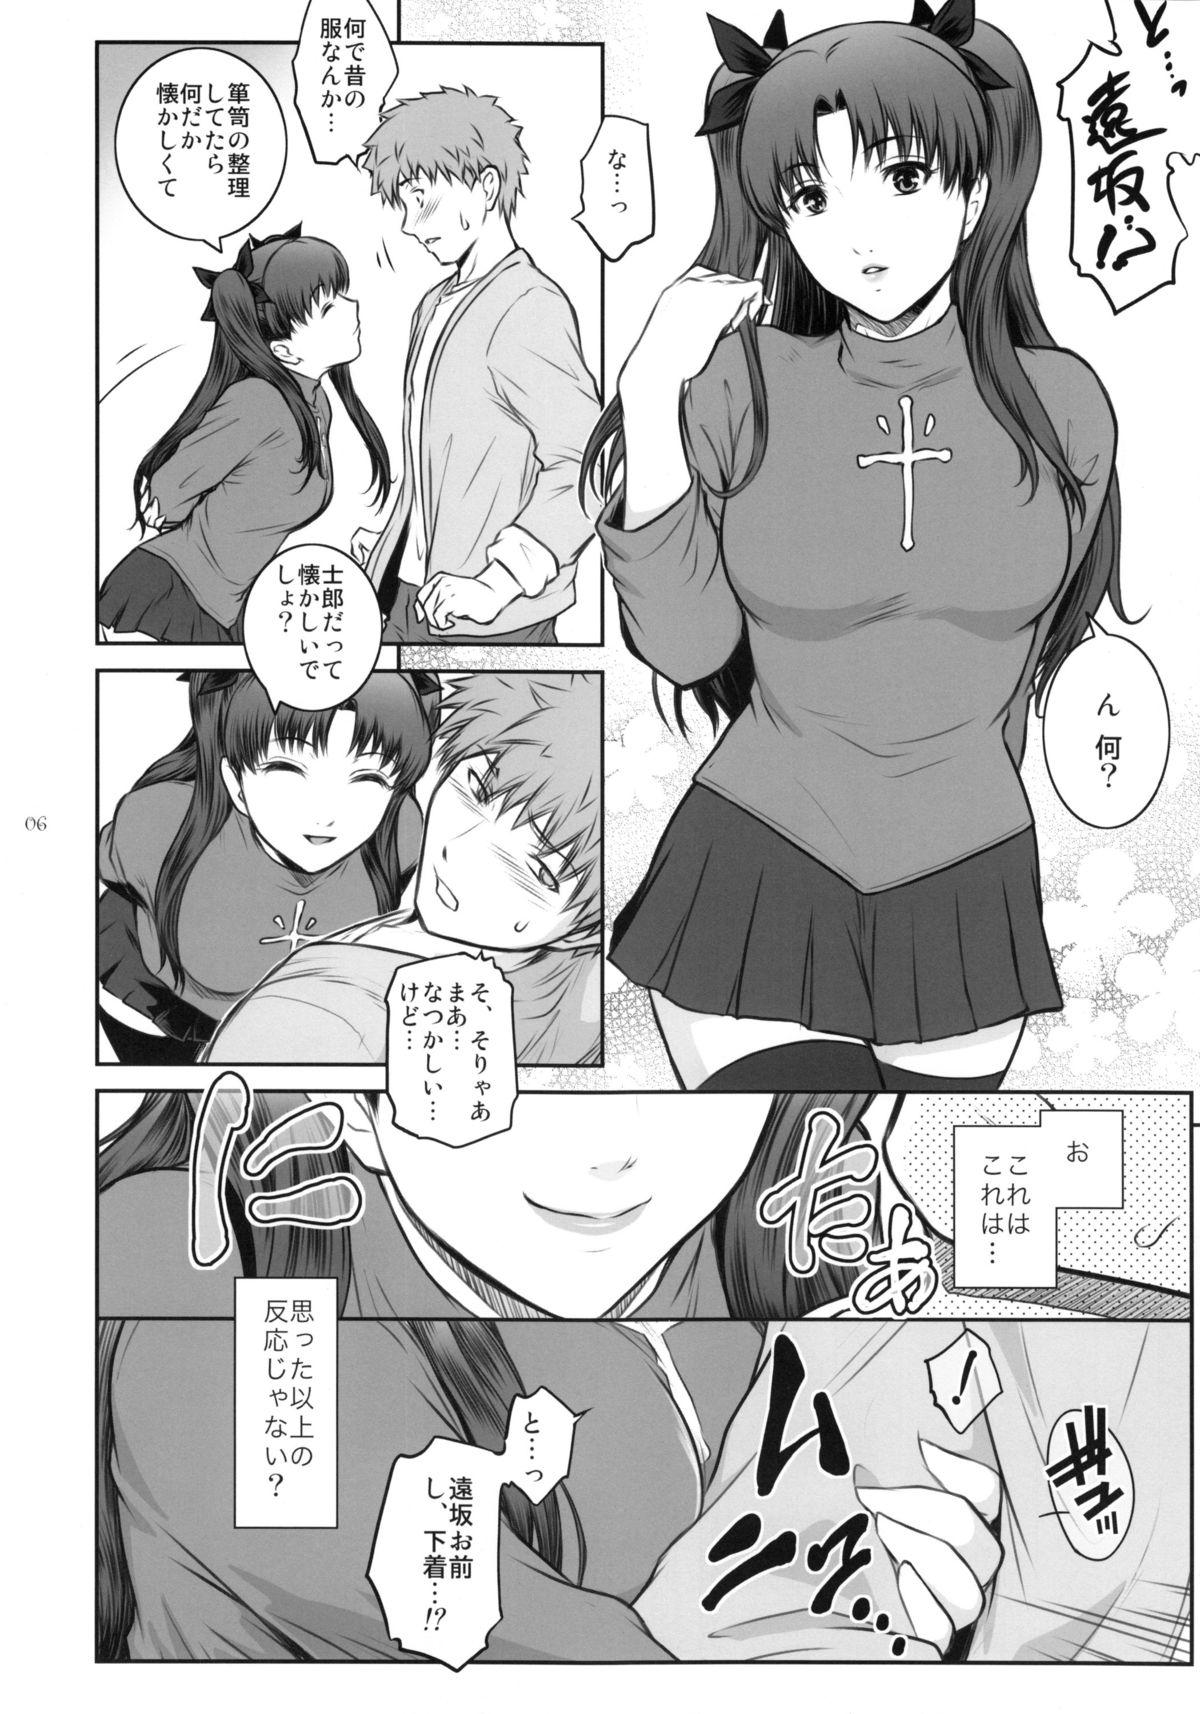 India Unusual Bedtime Working - Fate stay night Bailando - Page 6